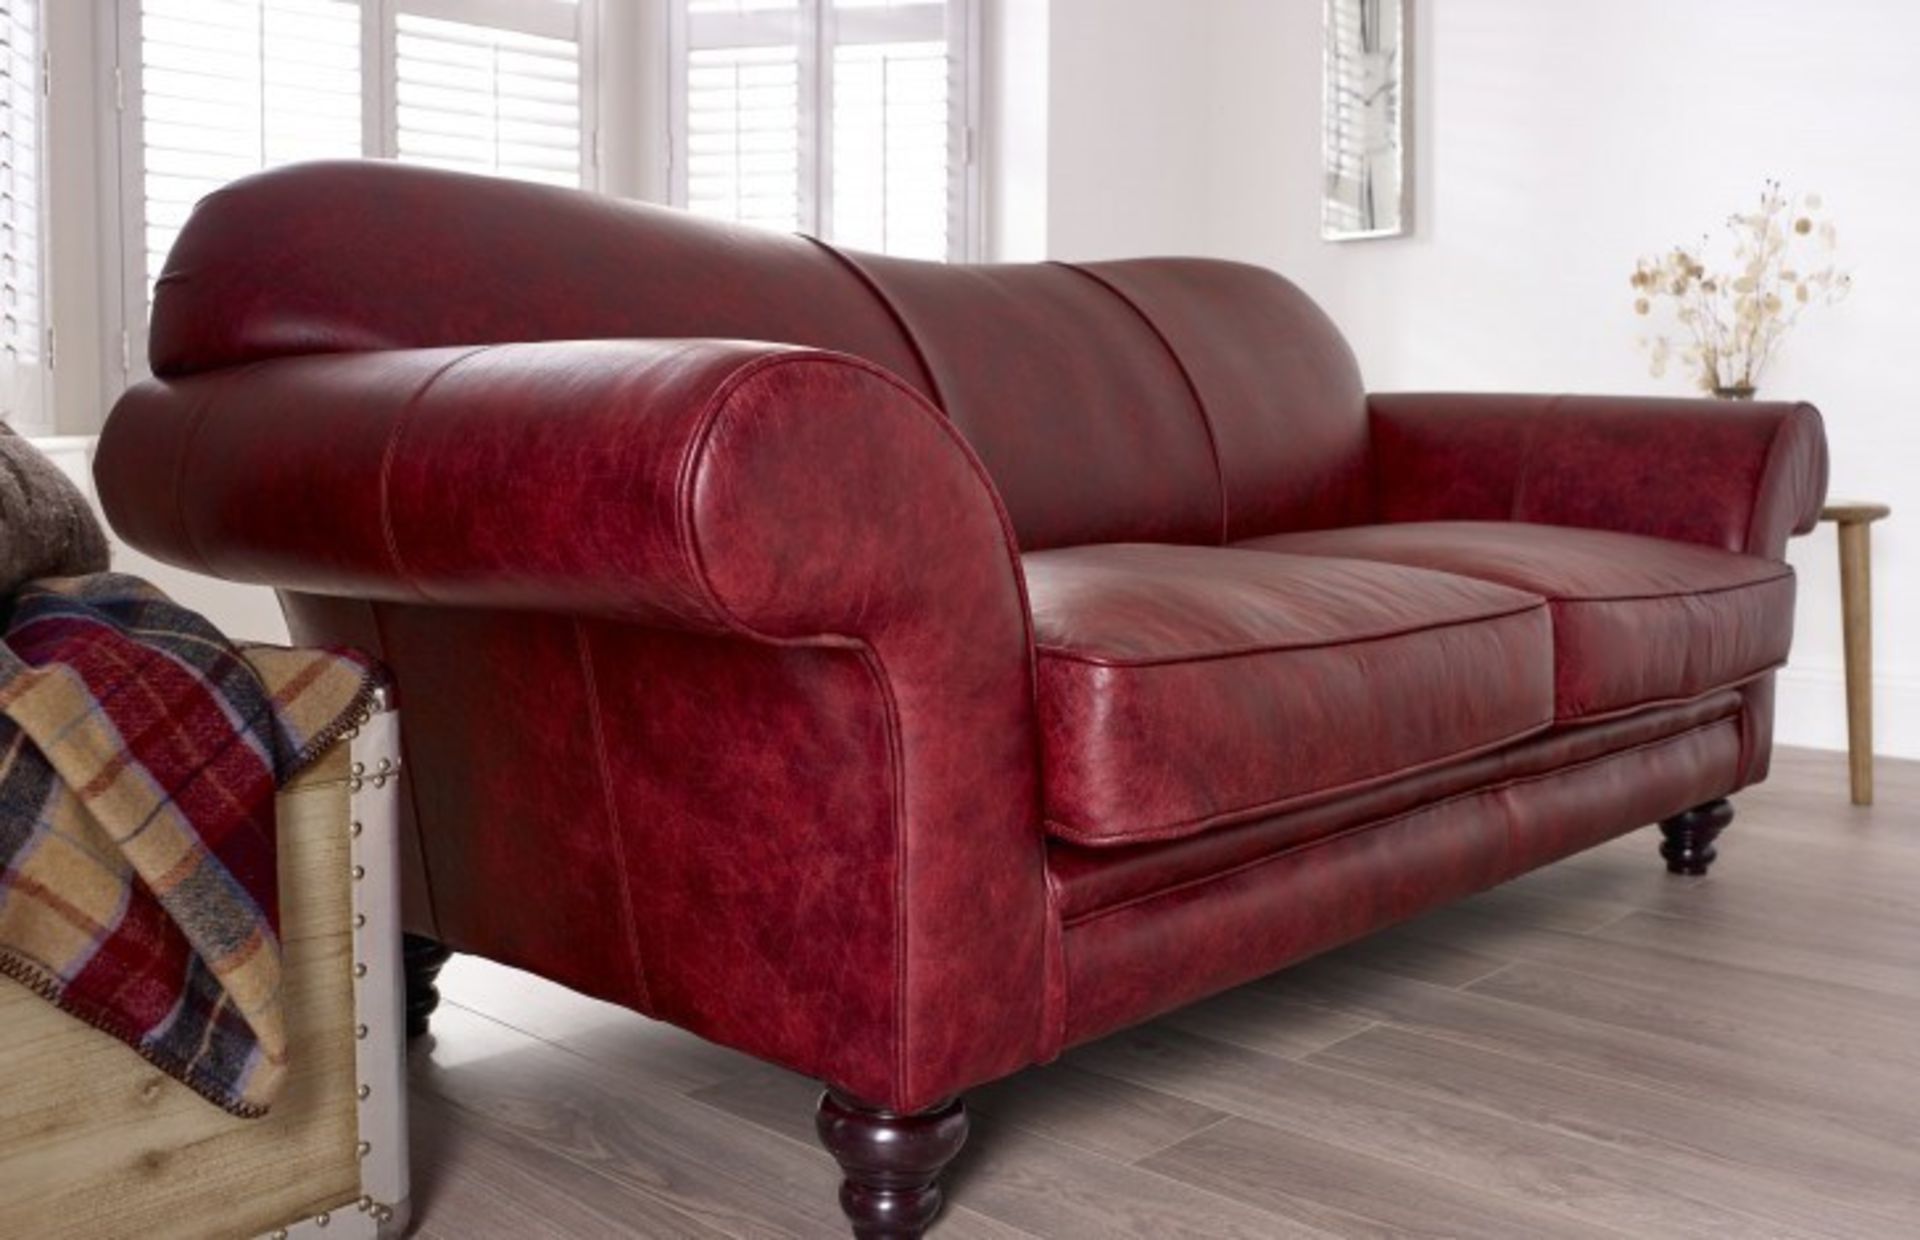 Eton 4 Seater Tobacco Leather Curved Sofa A Beautiful Narrower Depth Sofa A Contemporary Twist On - Image 2 of 2